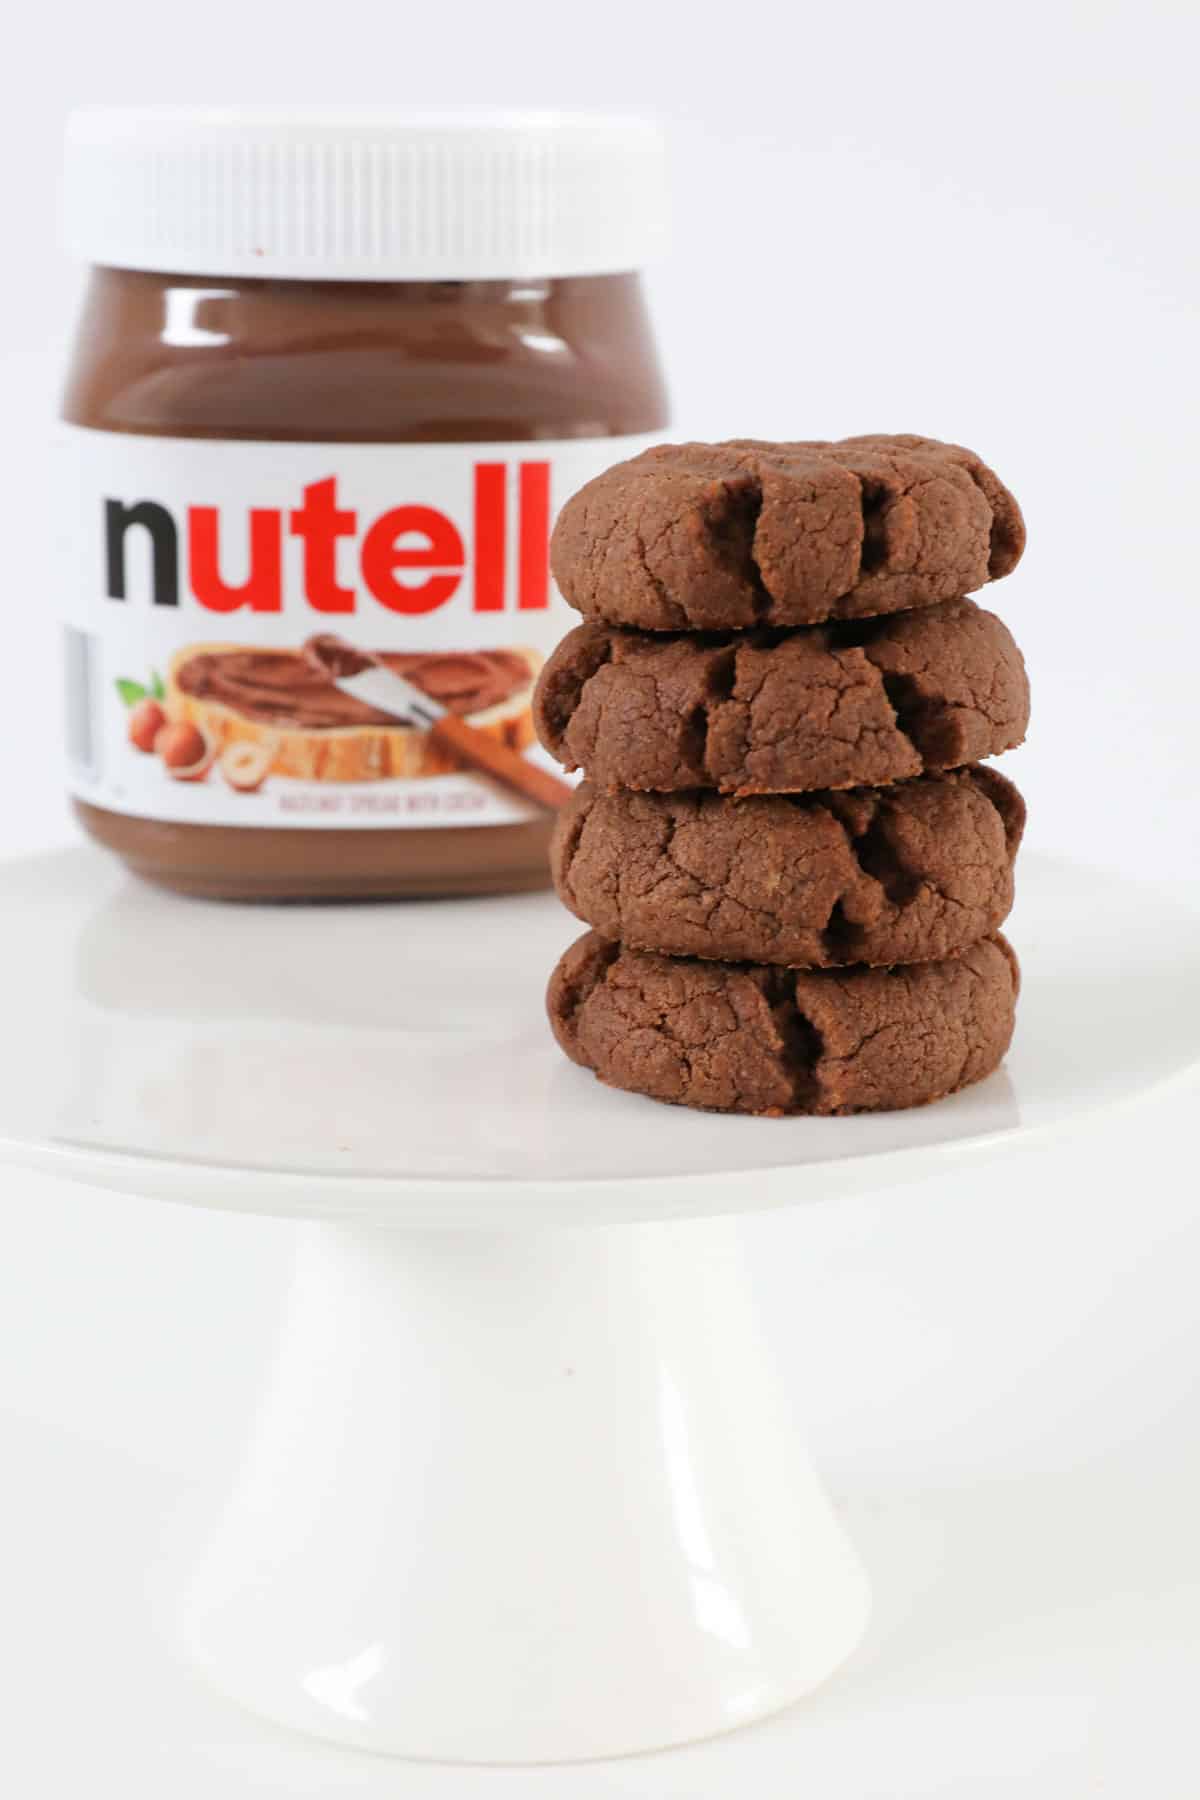 A stack of four cookies on a white cake stand with a jar of hazelnut spread in the background.